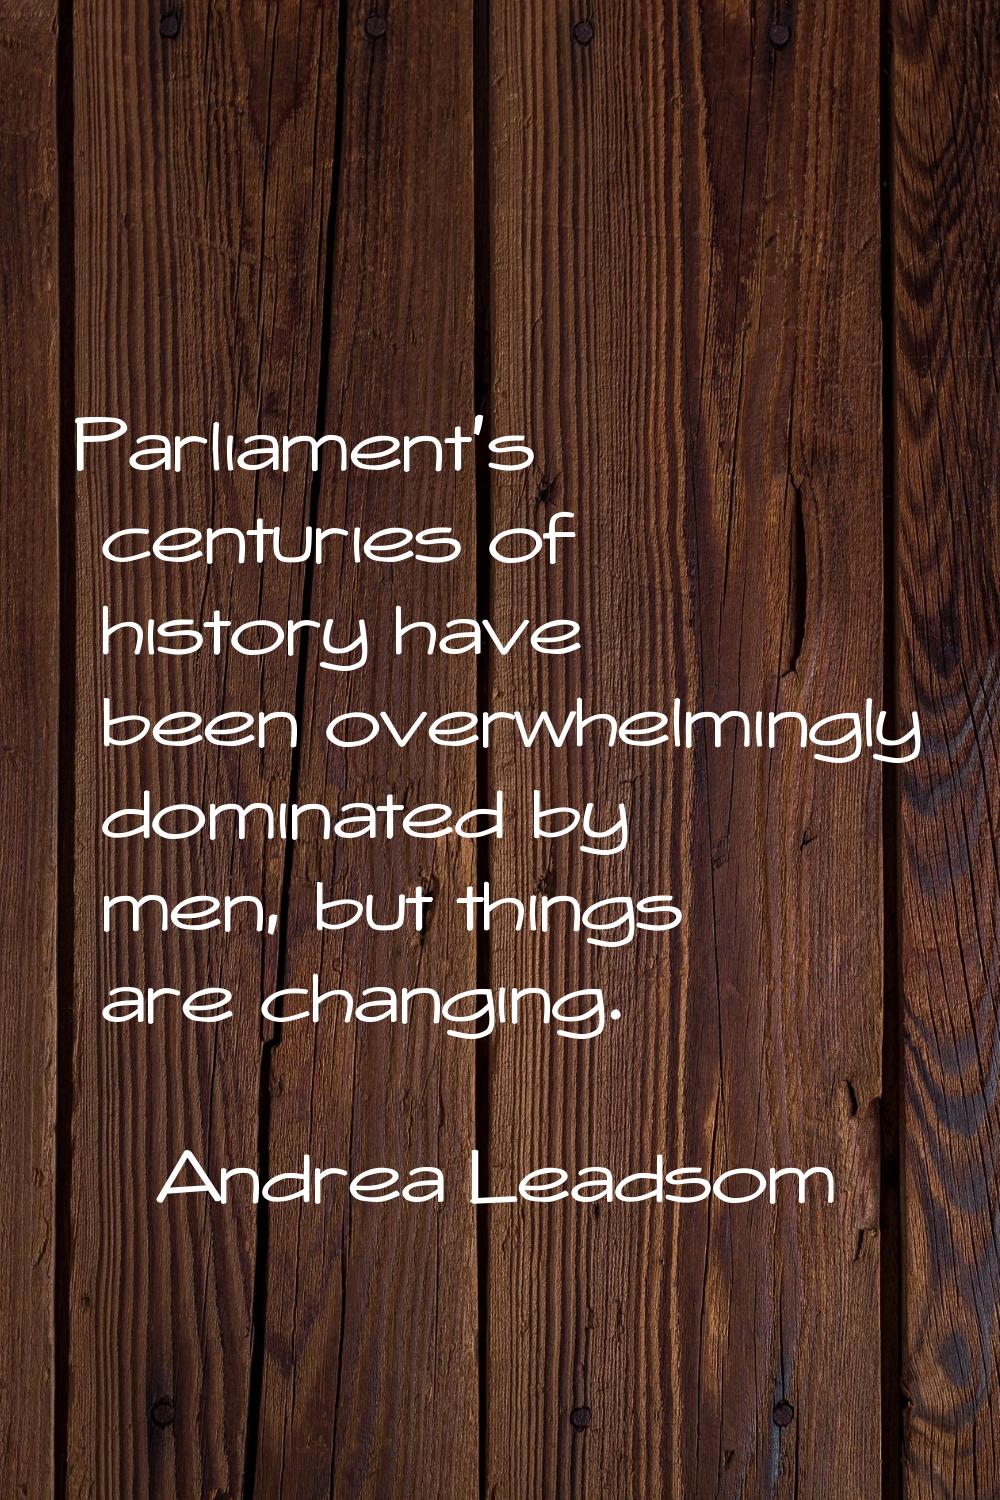 Parliament's centuries of history have been overwhelmingly dominated by men, but things are changin